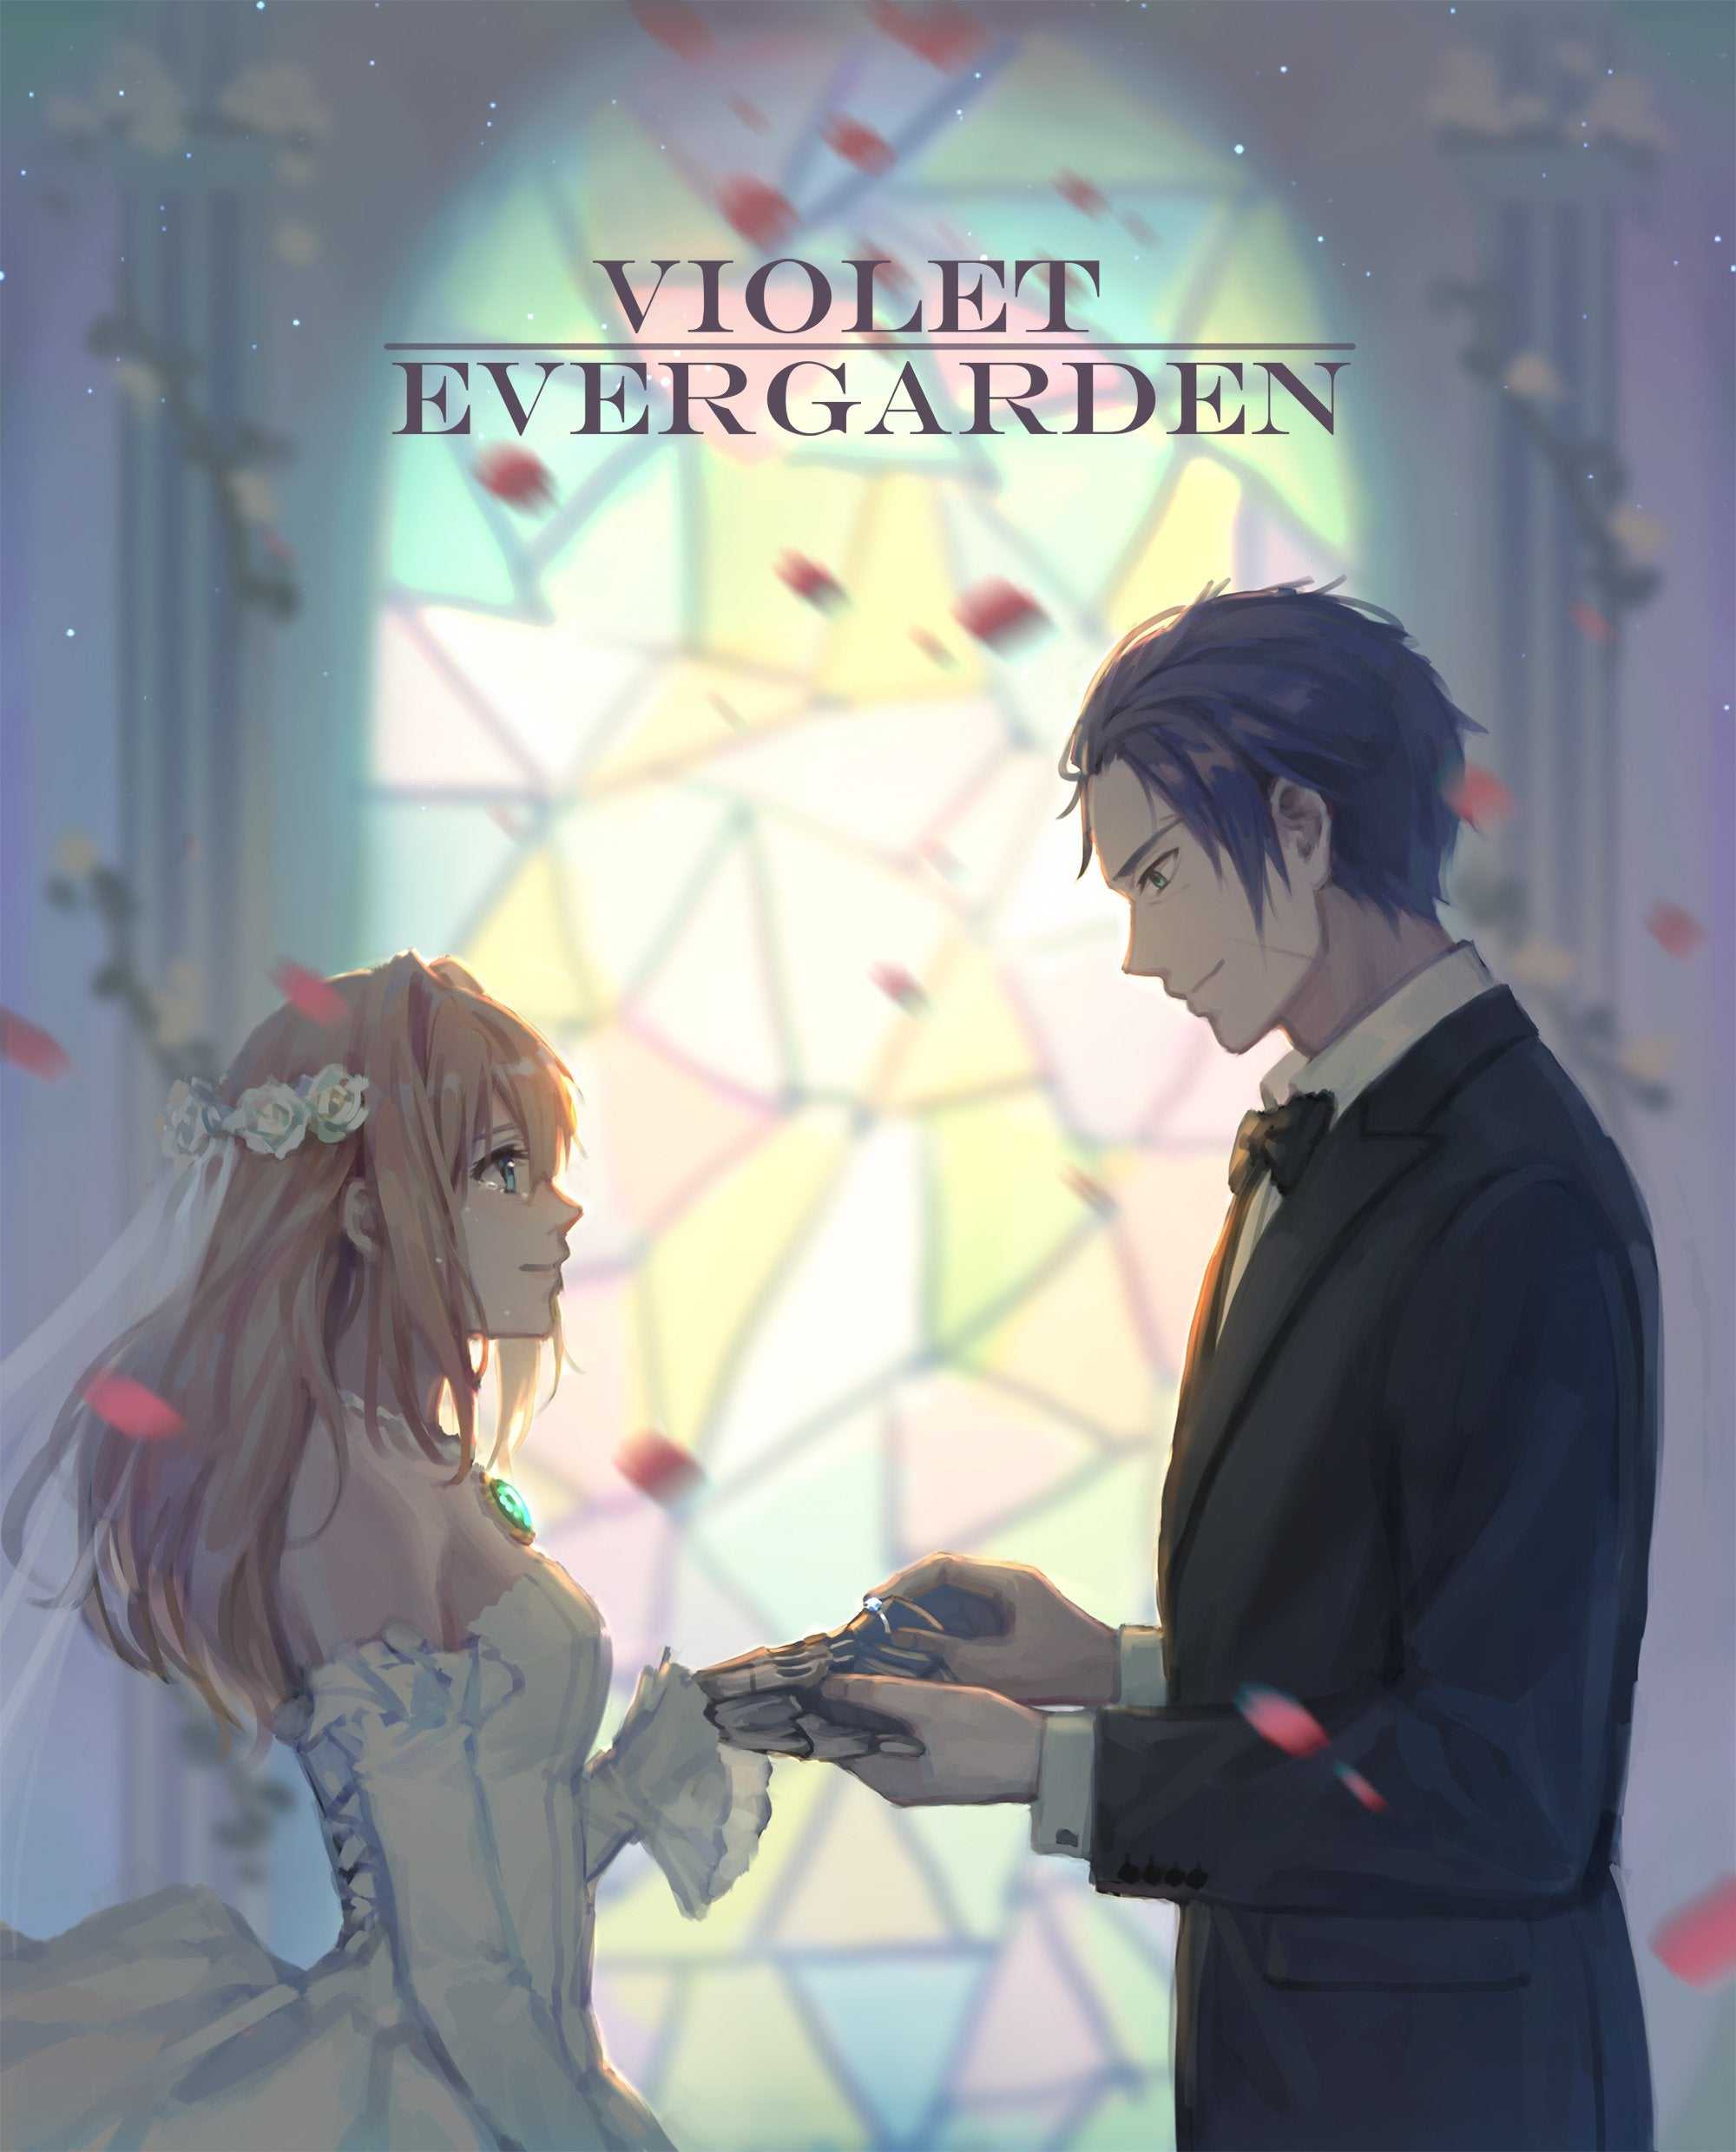 What are some really emotional anime like Violet Evergarden? - Quora